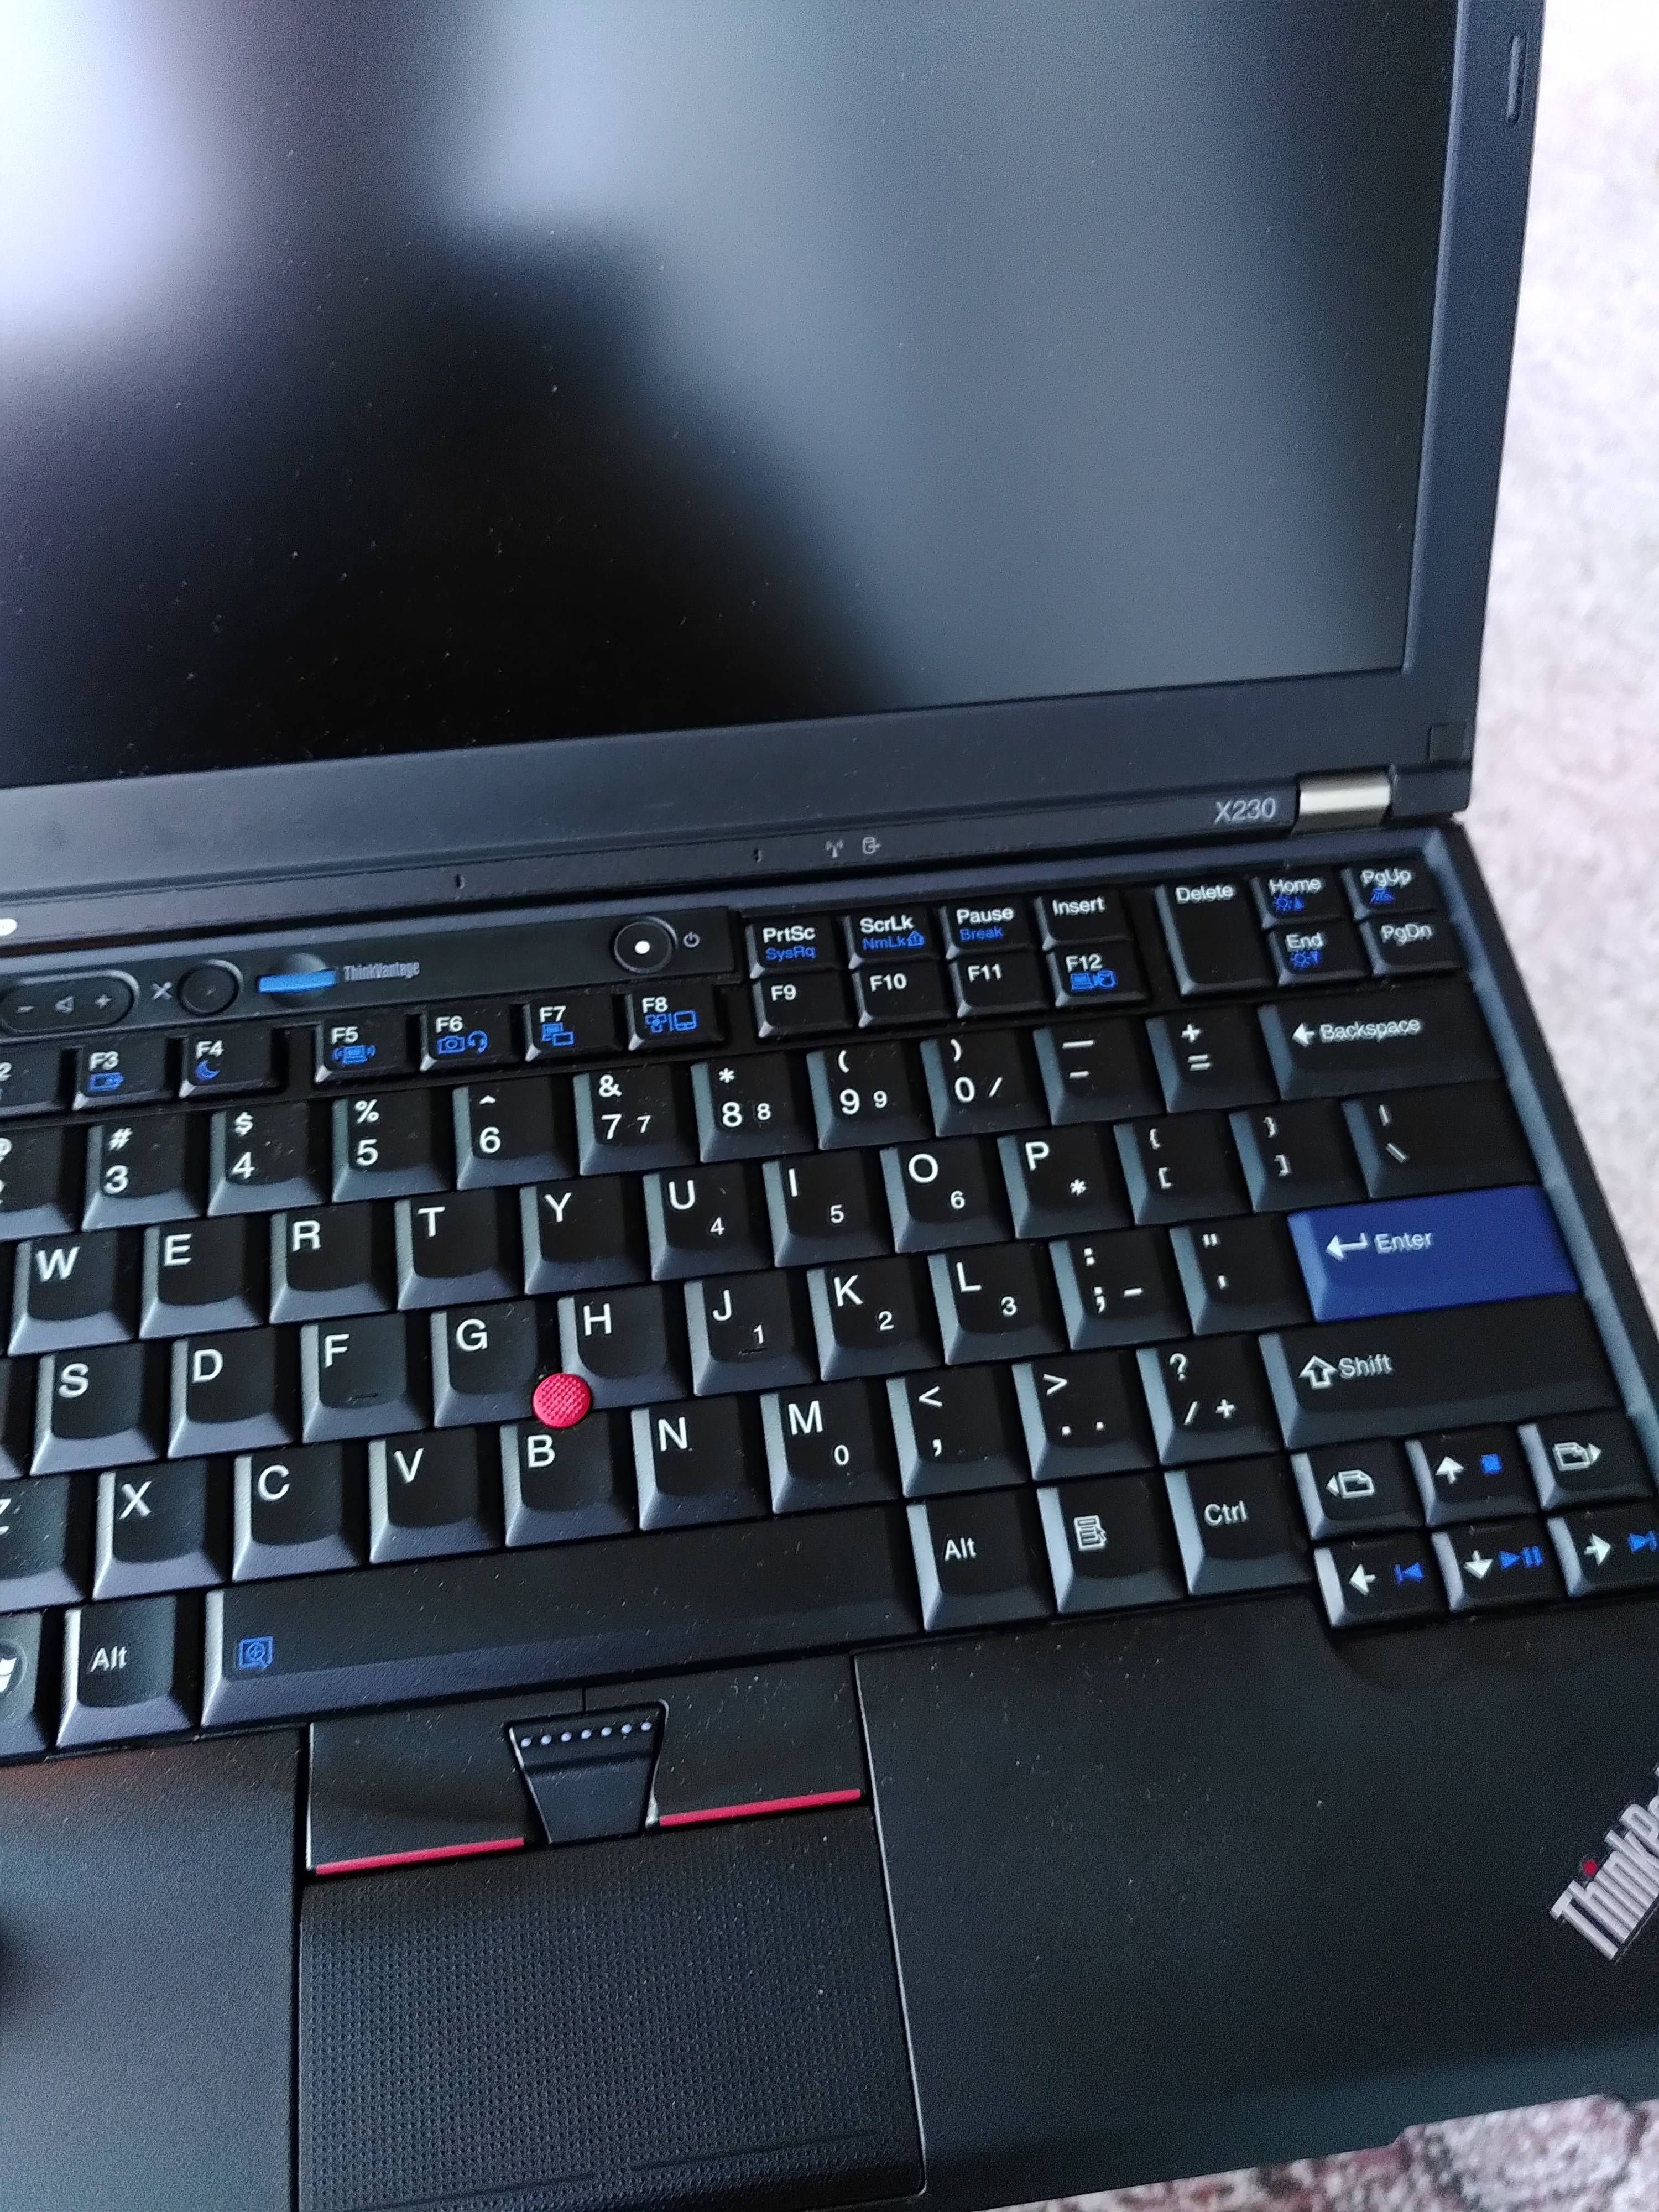 Closeup of the keyboard on a Thinkpad x230, but it's not actually an x230 keyboard.